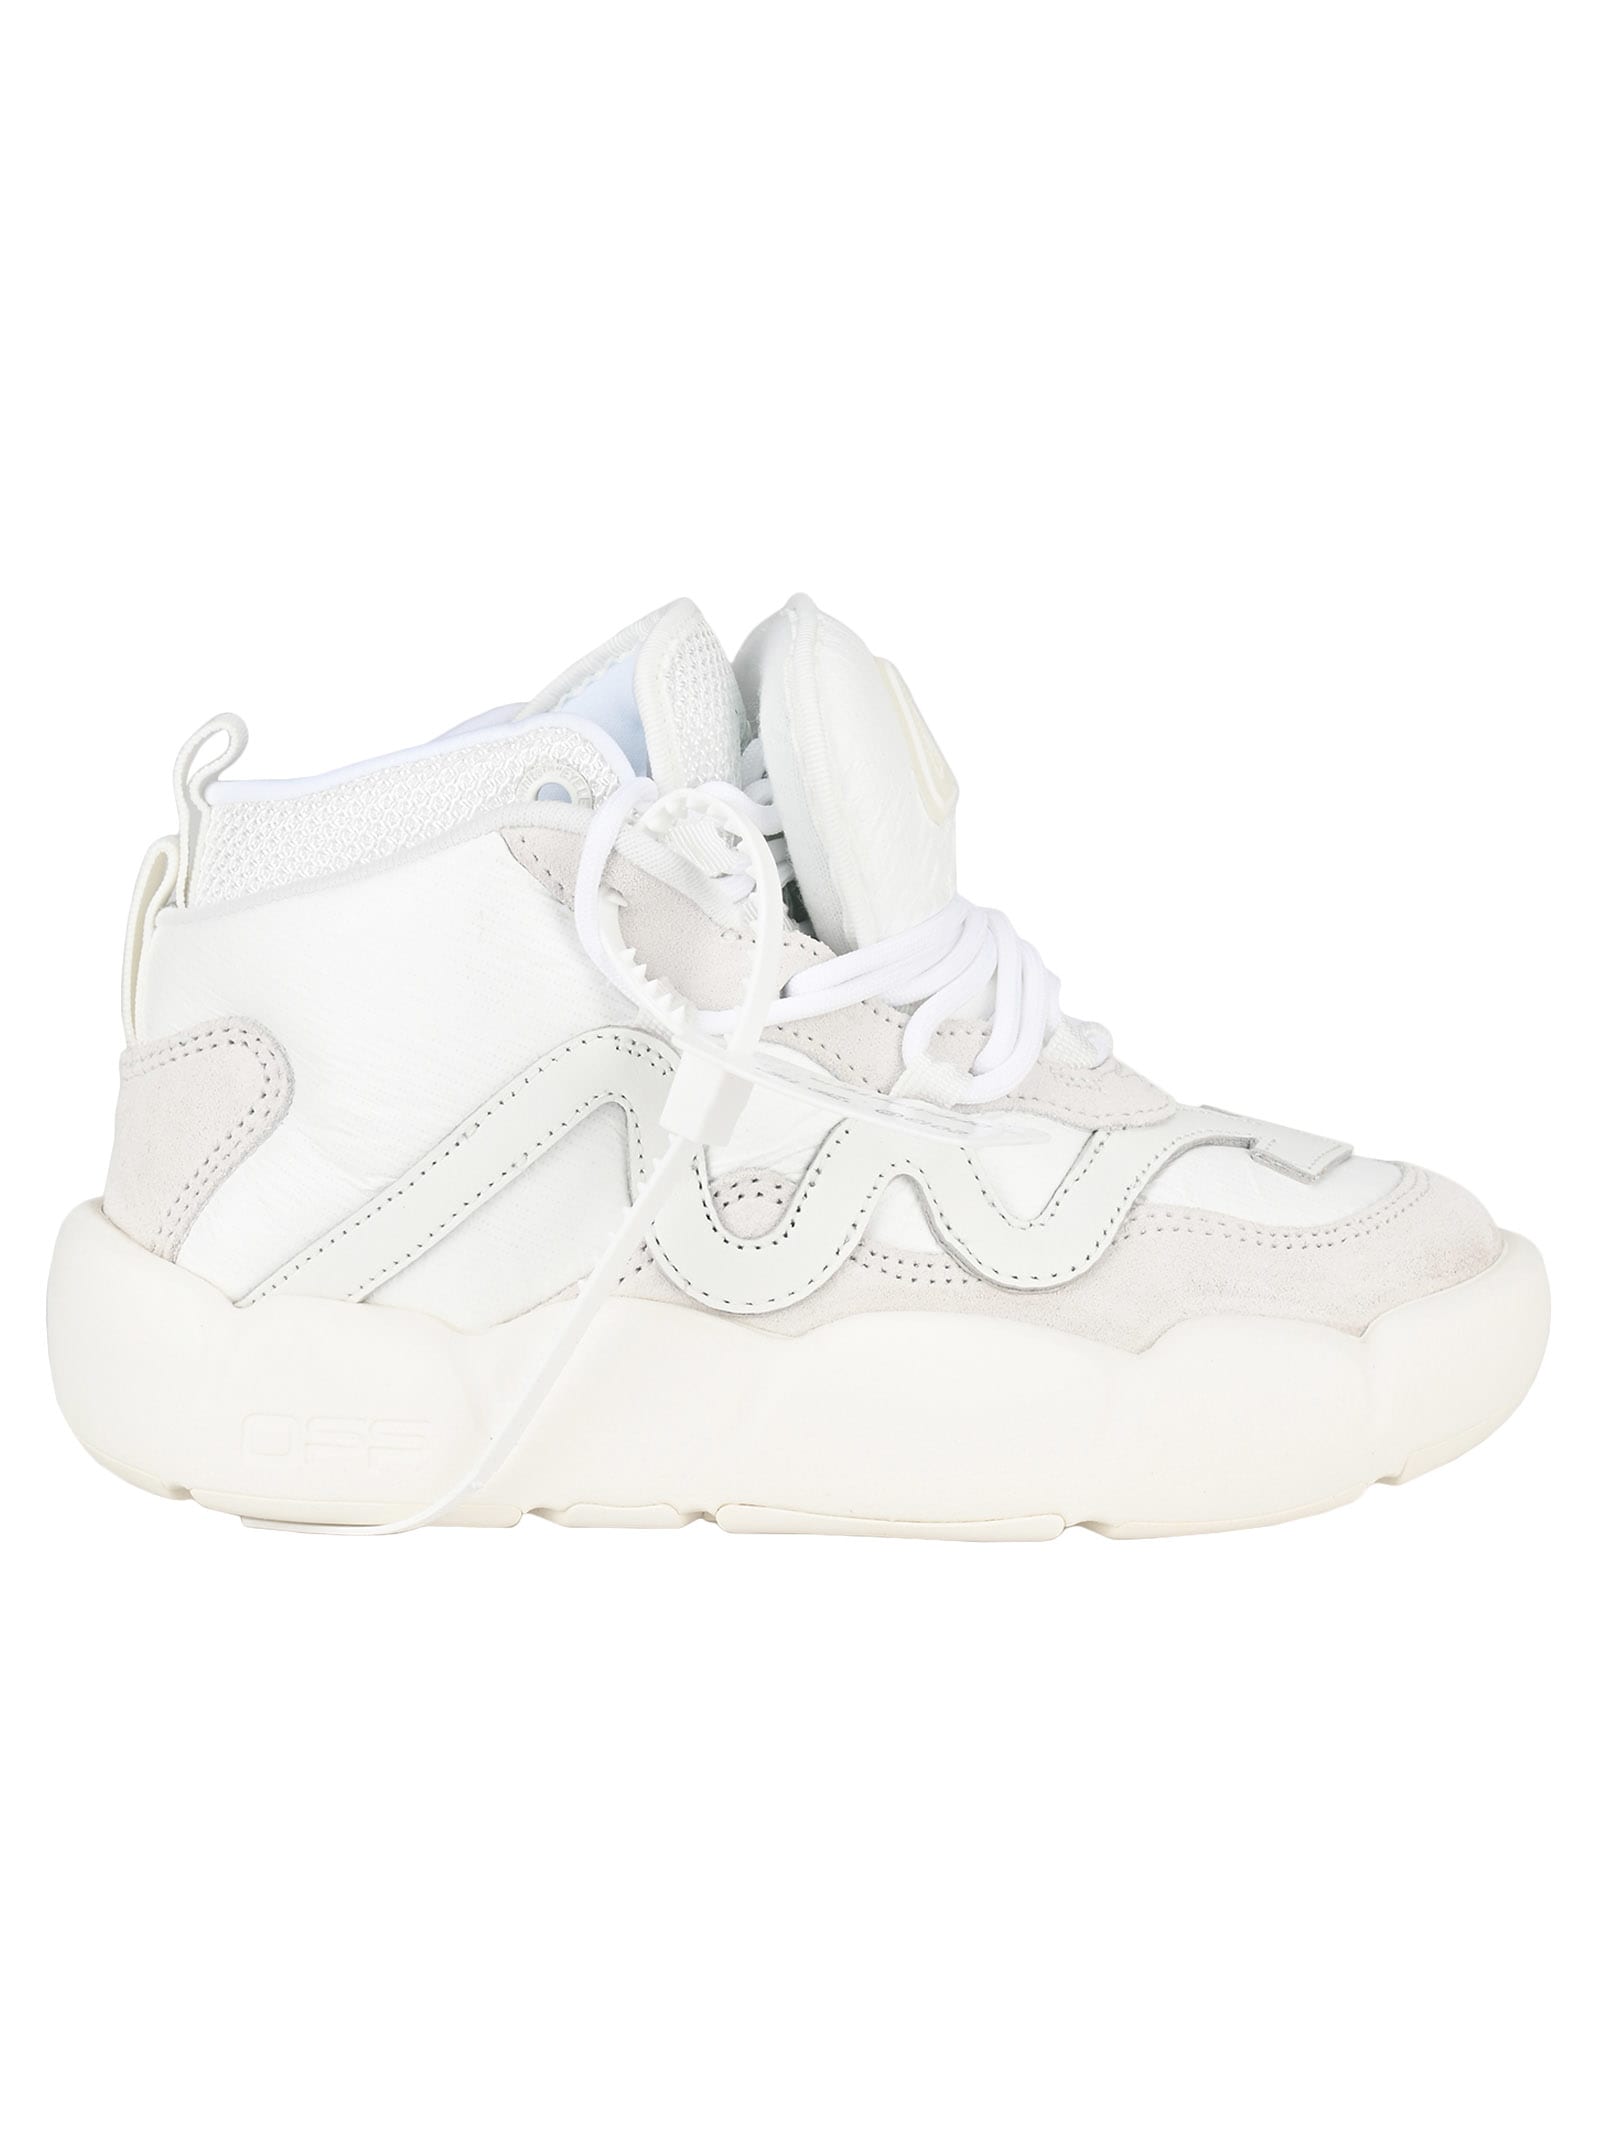 off white shoes for sale